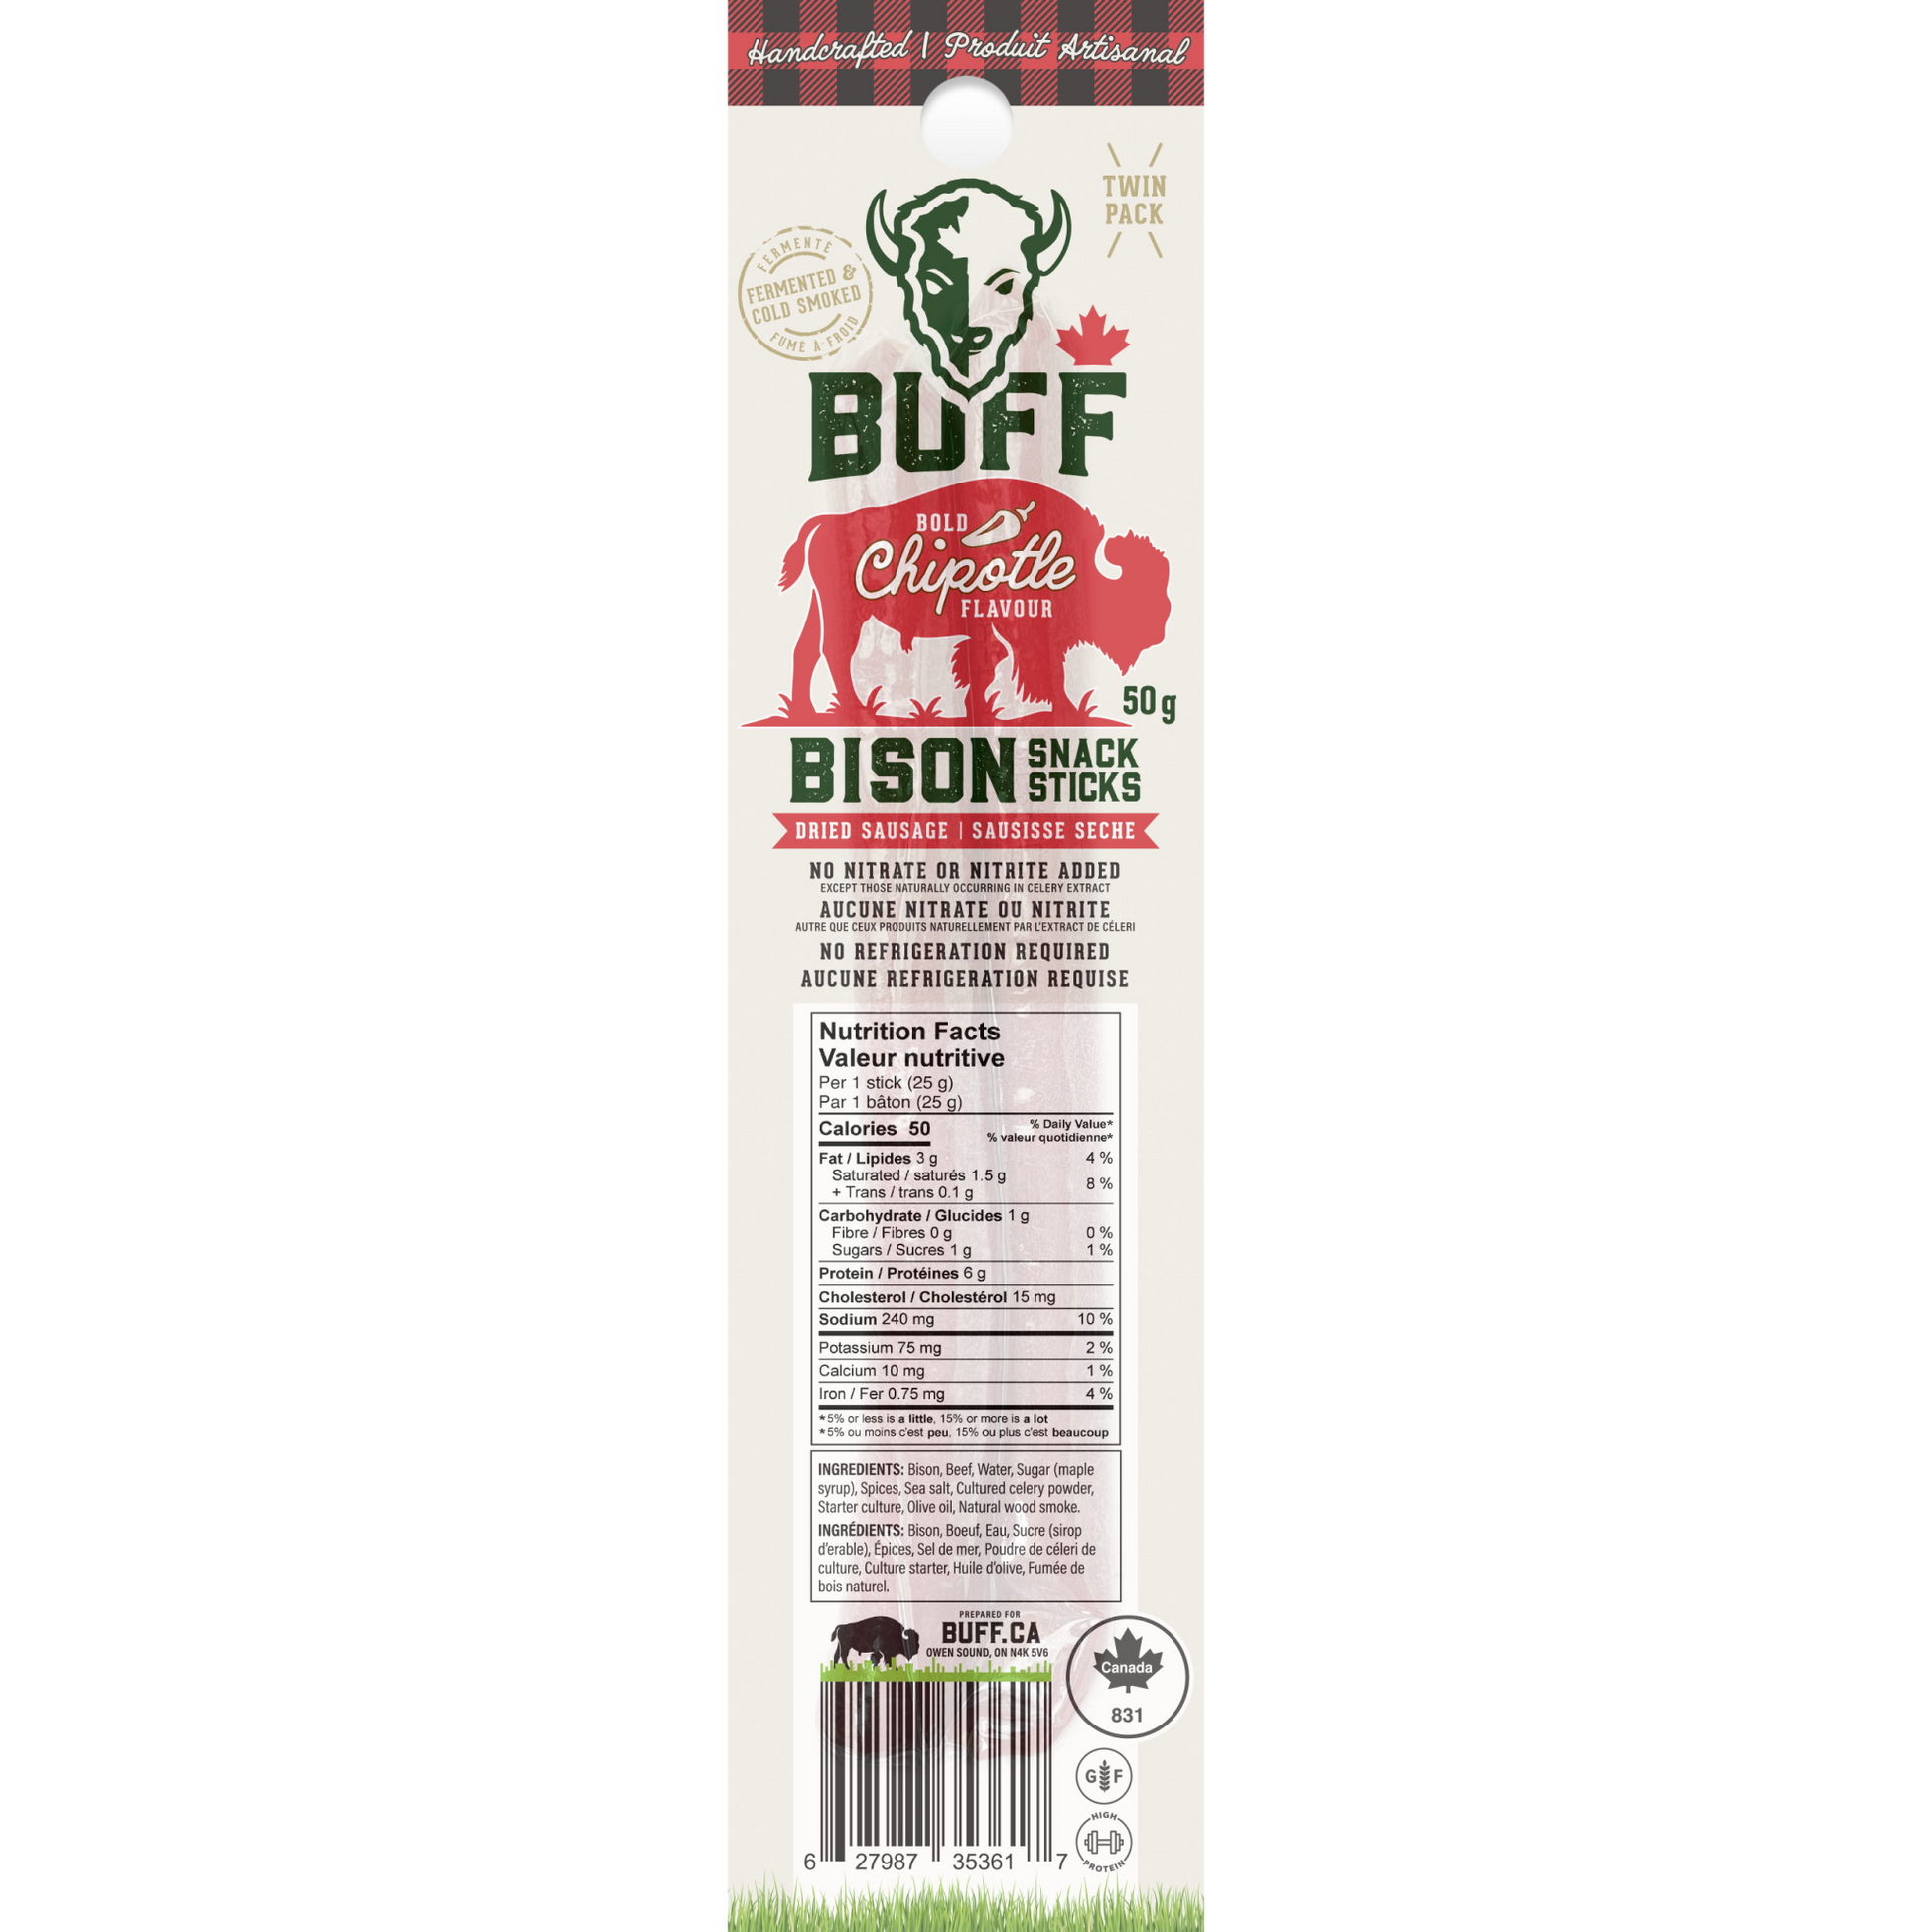 Bold Chipotle Twin Pack - Healthy Bison Meat Snack Sticks - BUFF